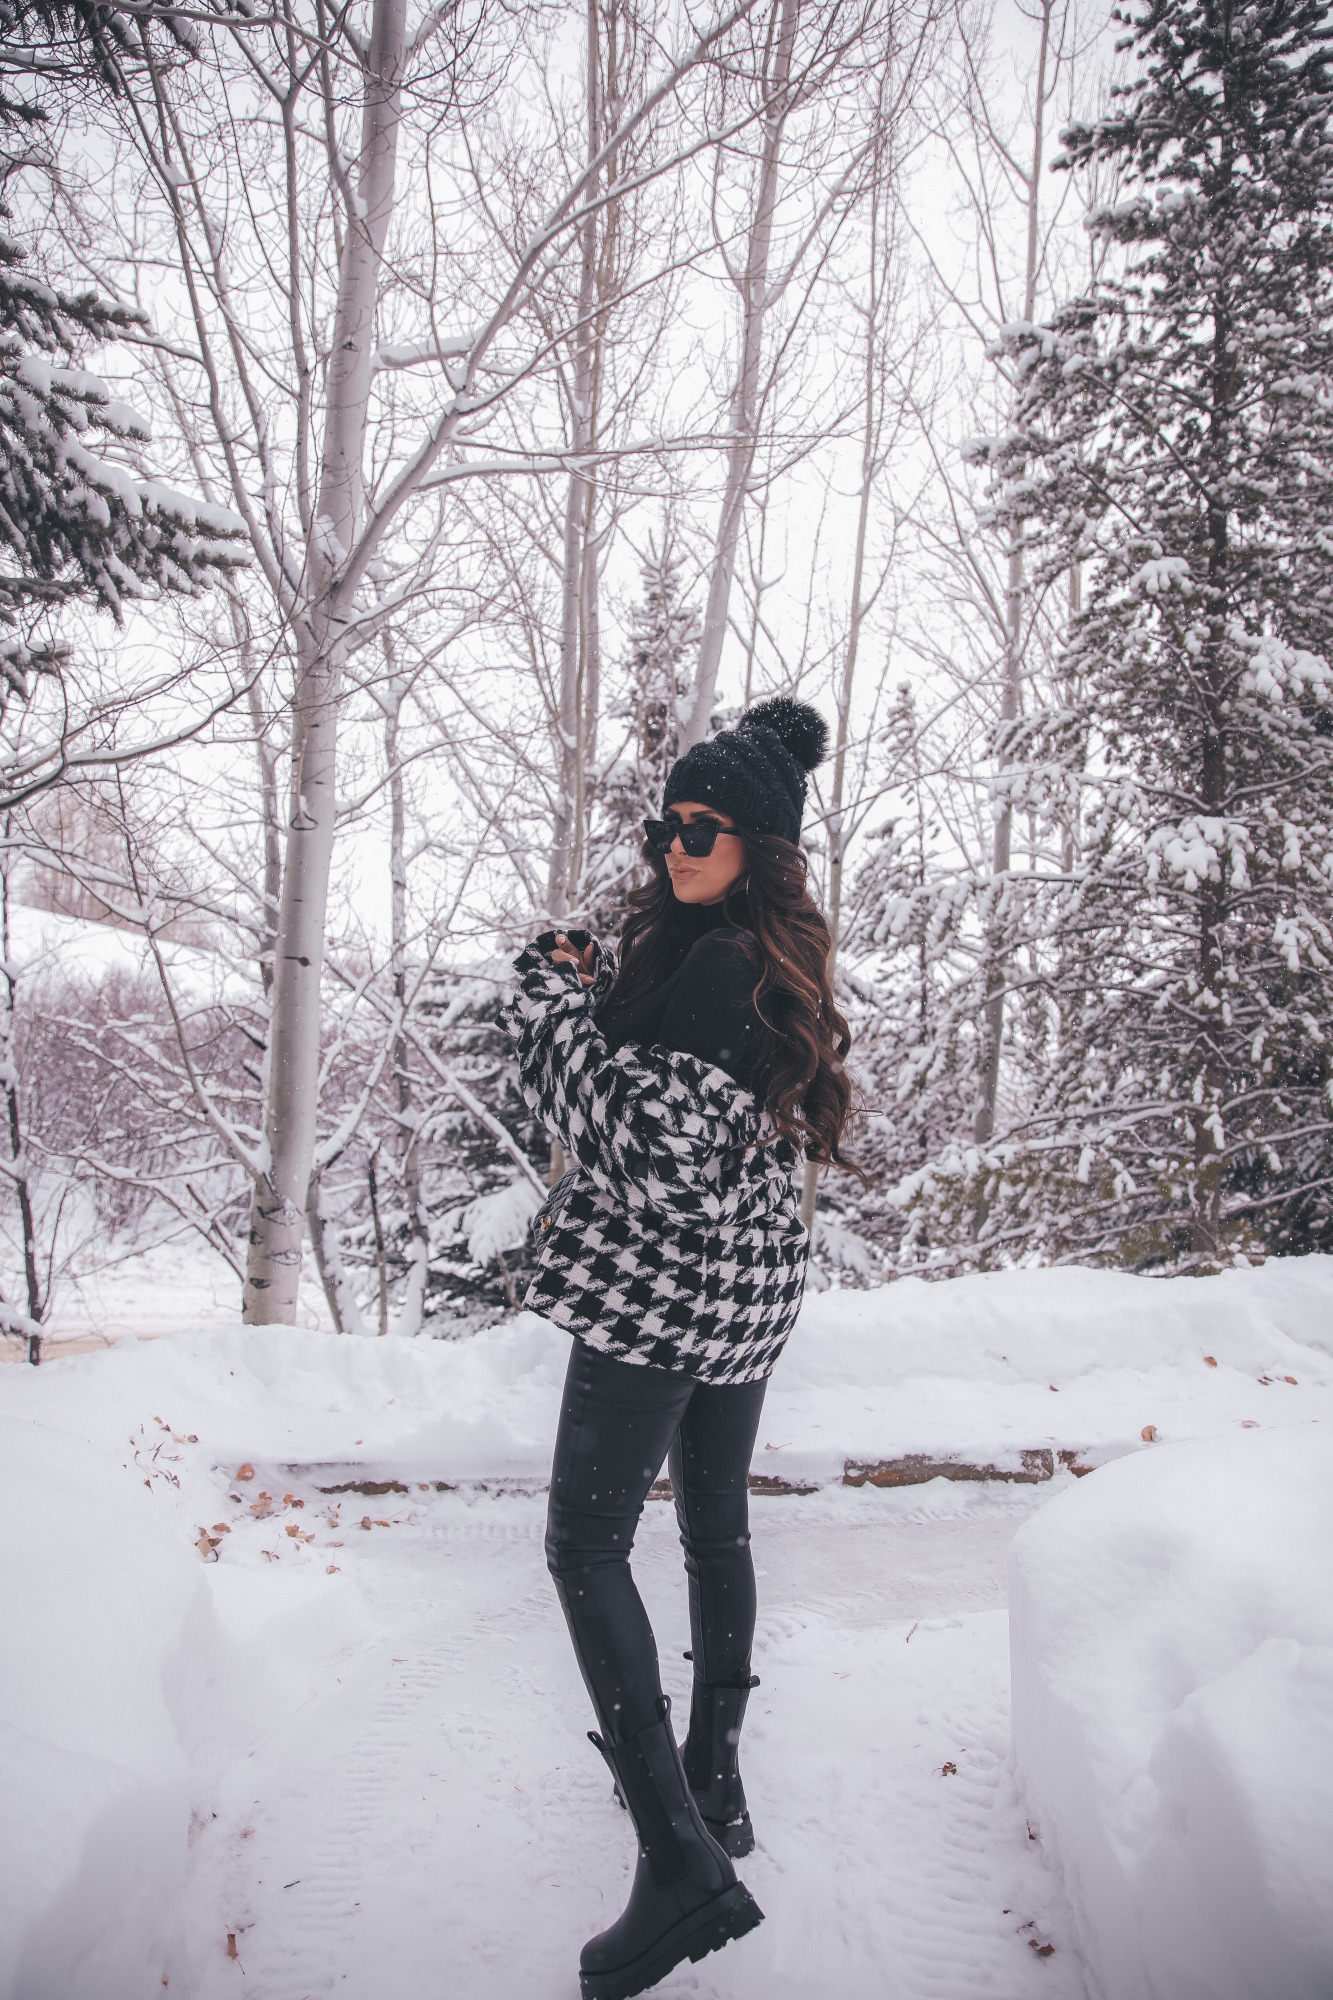 lug sole boots chelsea boots, winter outfit idea snow jackson hole, emily gemma | Lug Sole Boots by popular US fashion blog, The Sweetest Thing: image of Emily Gemma wearing a Storets black and white houndstooth jacket, Good American bodysuit, BlankNYC faux leather pants, Steve Madden black lug sole boots, BP. sunglasses, TopShop black pom beanie, Chanel handbag, Monica Vinader ring, Rolex watch, Cartier bracelets, and Iconic Nude' + KIM K.W. + White Russian Sparkle lip combo. 